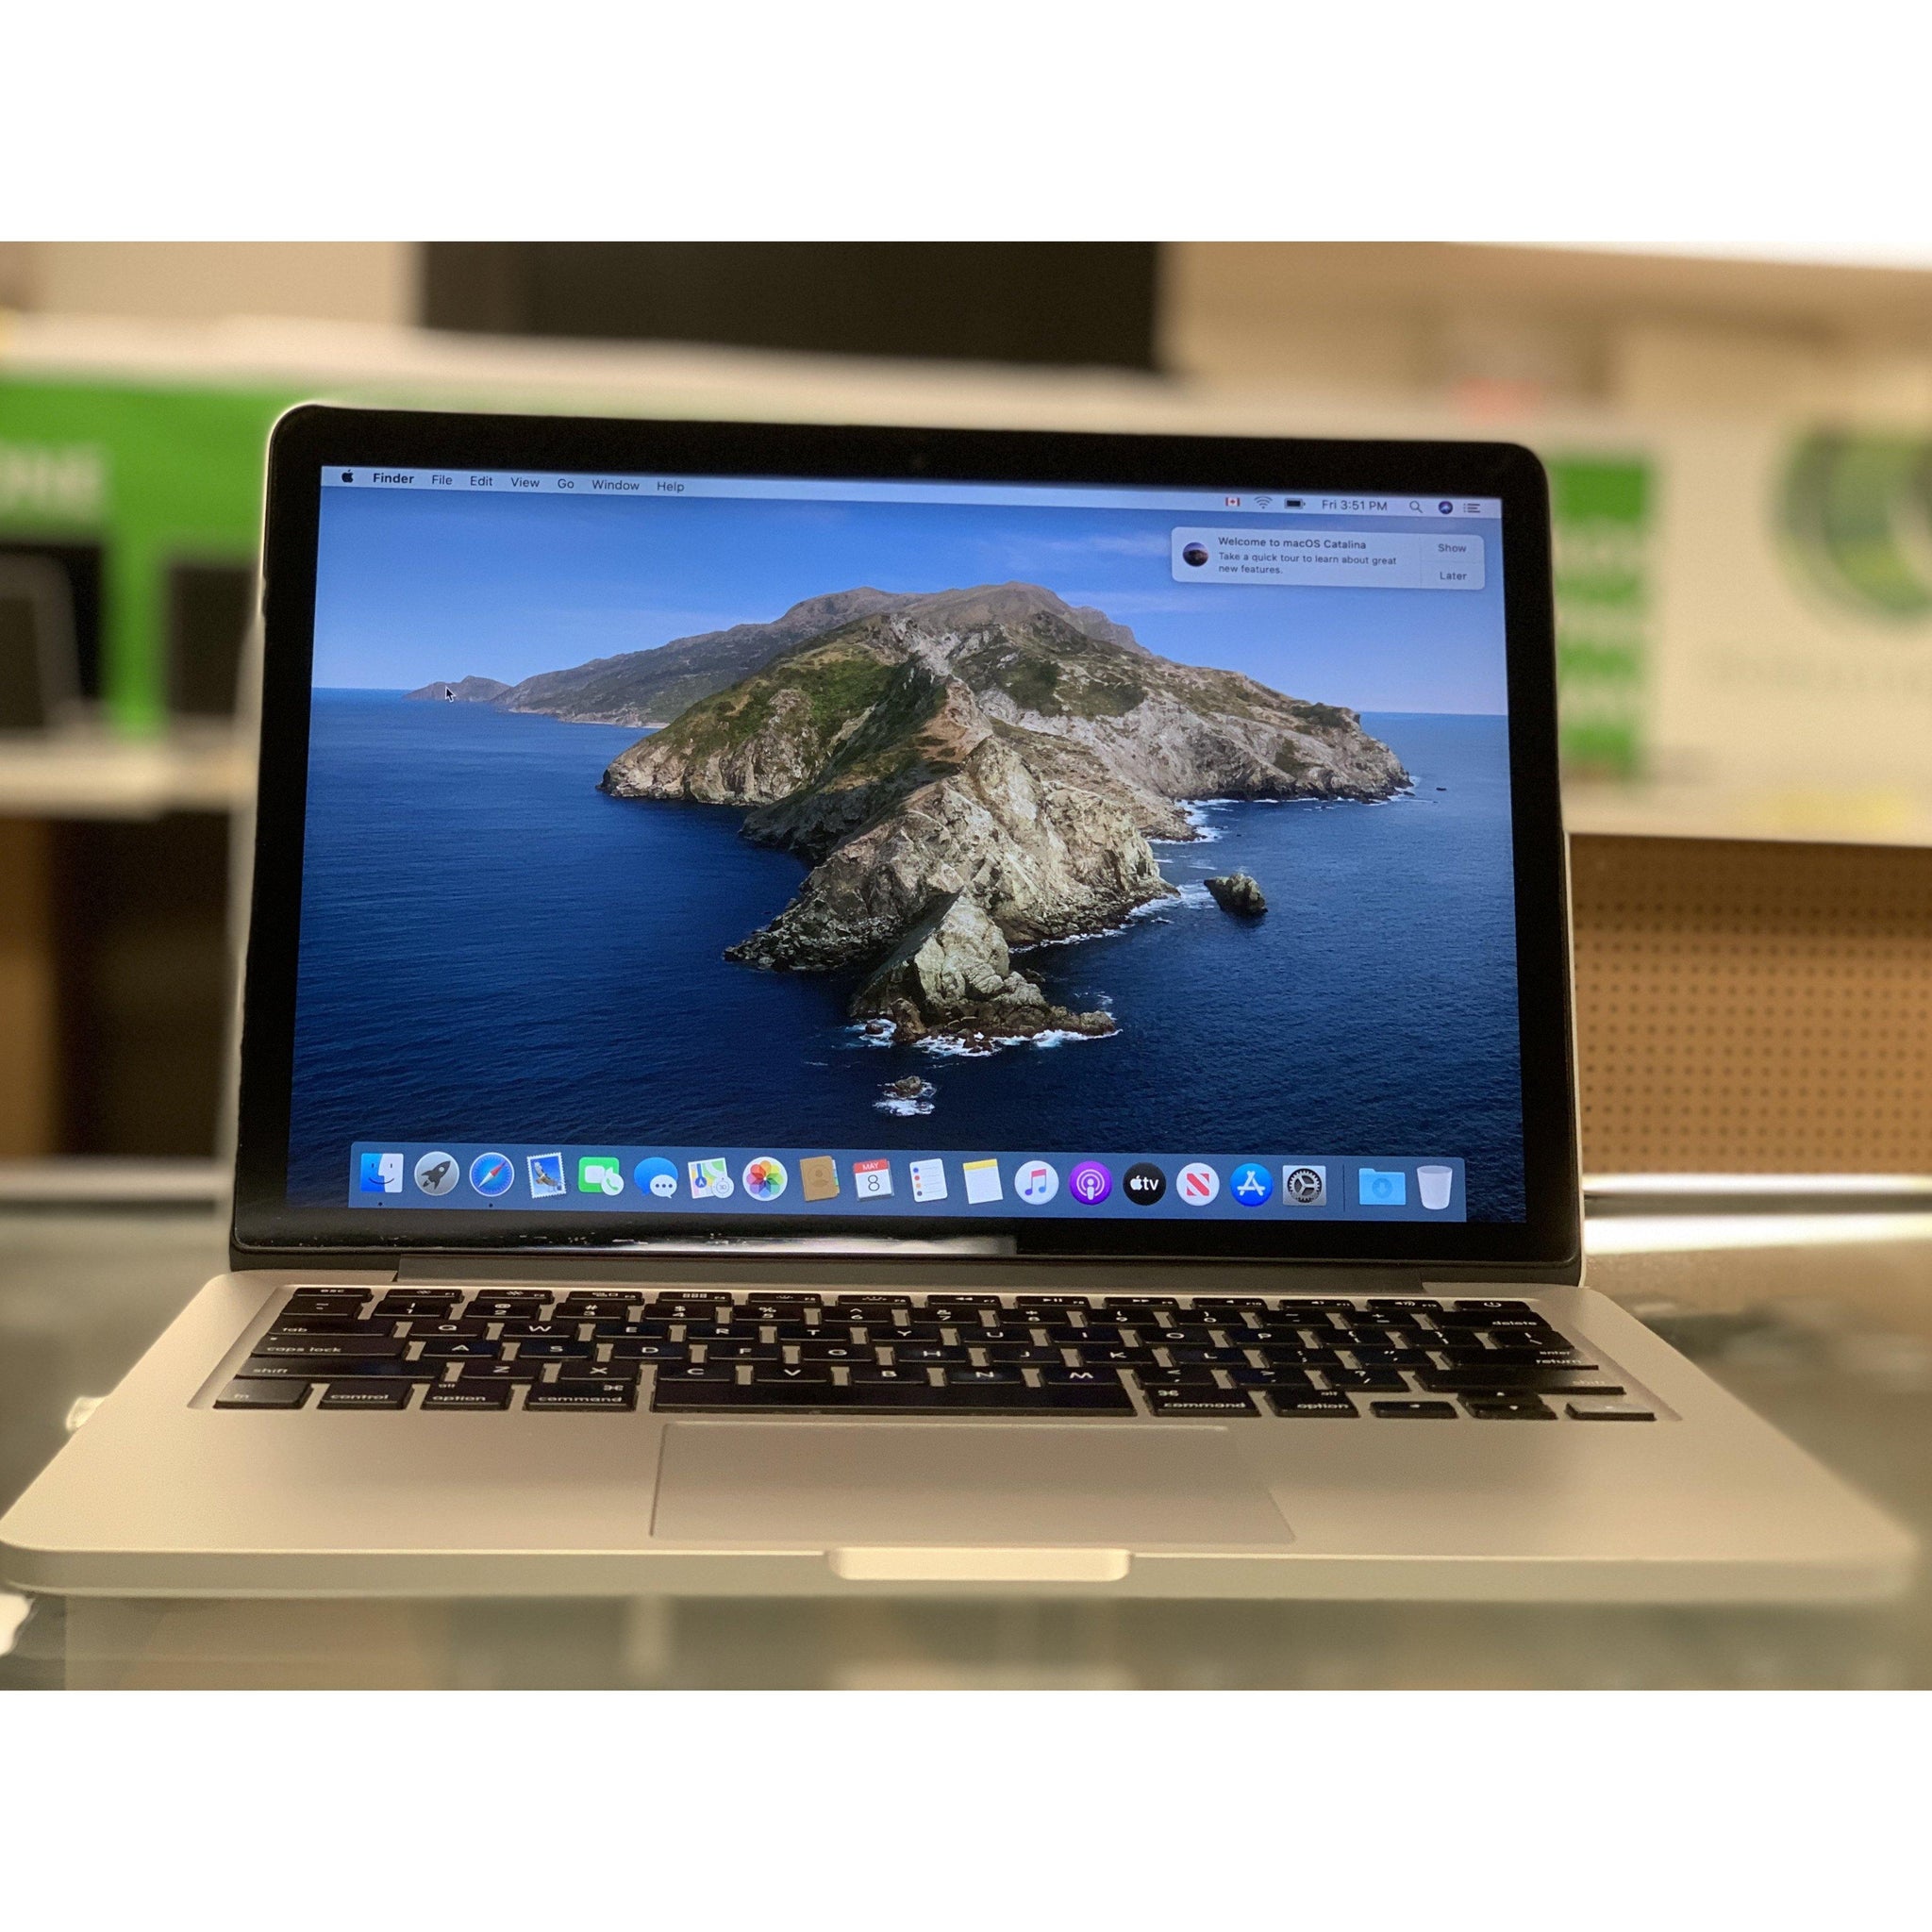 15 inch mid 2012 macbook pro for sale